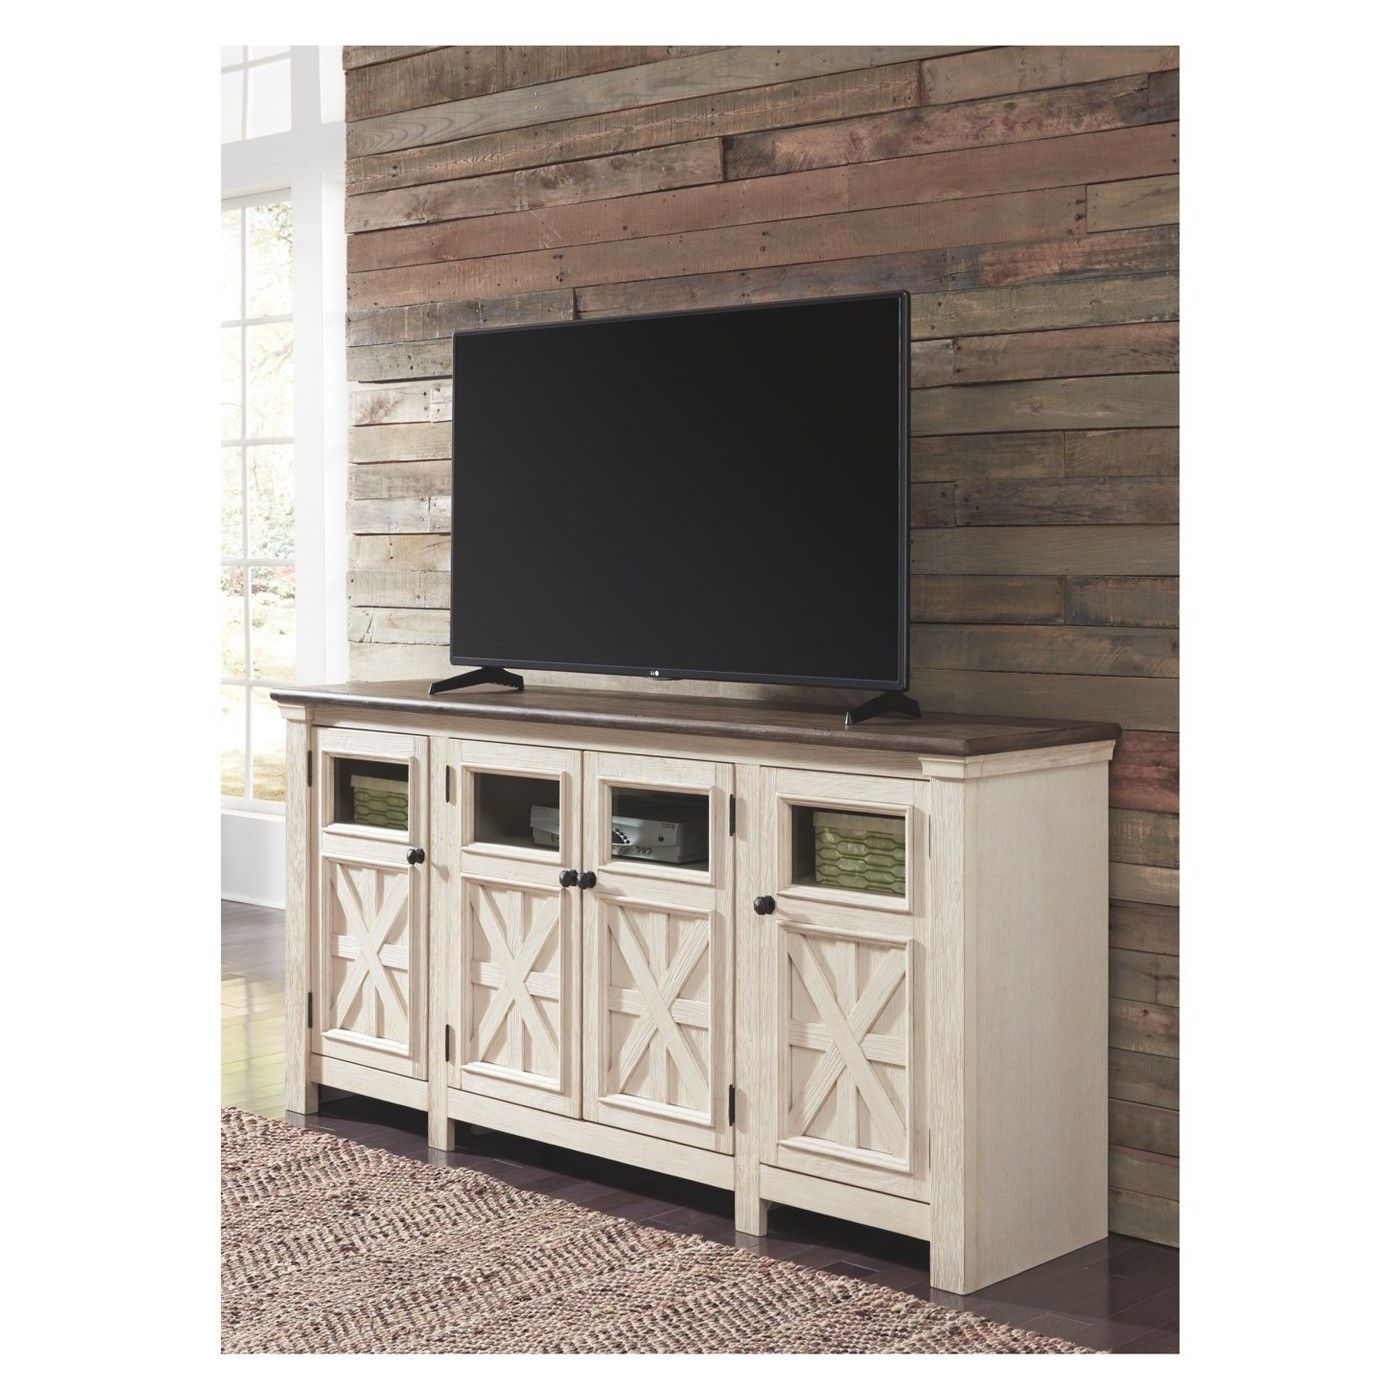 Bolanburg Extra Large Tv Stand Brown/white – Signature Intended For Chromium Extra Wide Tv Unit Stands (View 2 of 20)